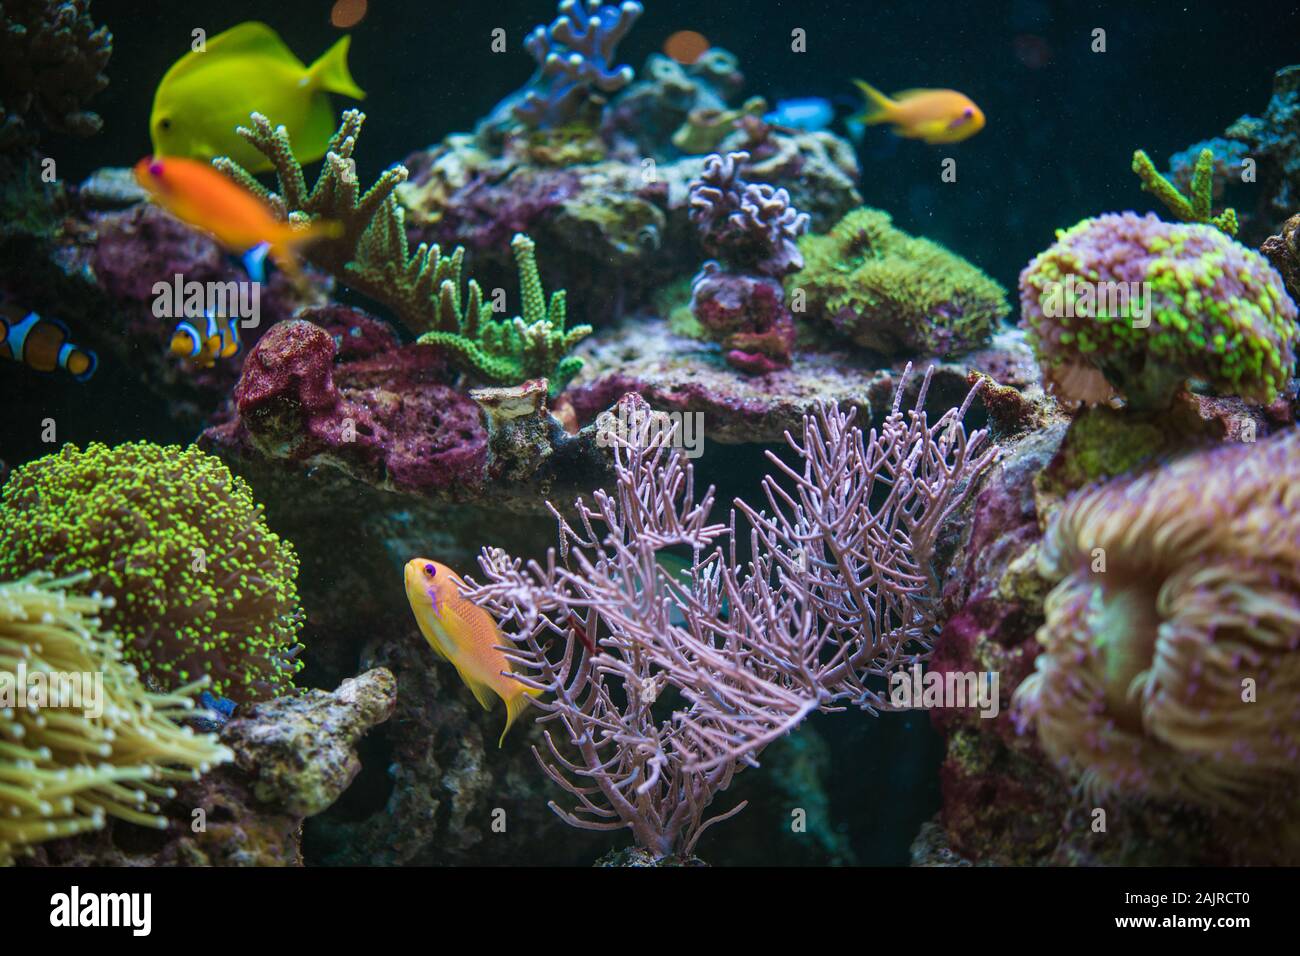 Reef and Tropical Fishes Hobby. Colorful Marine Plants and Animals in the Marine Aquarium. Stock Photo